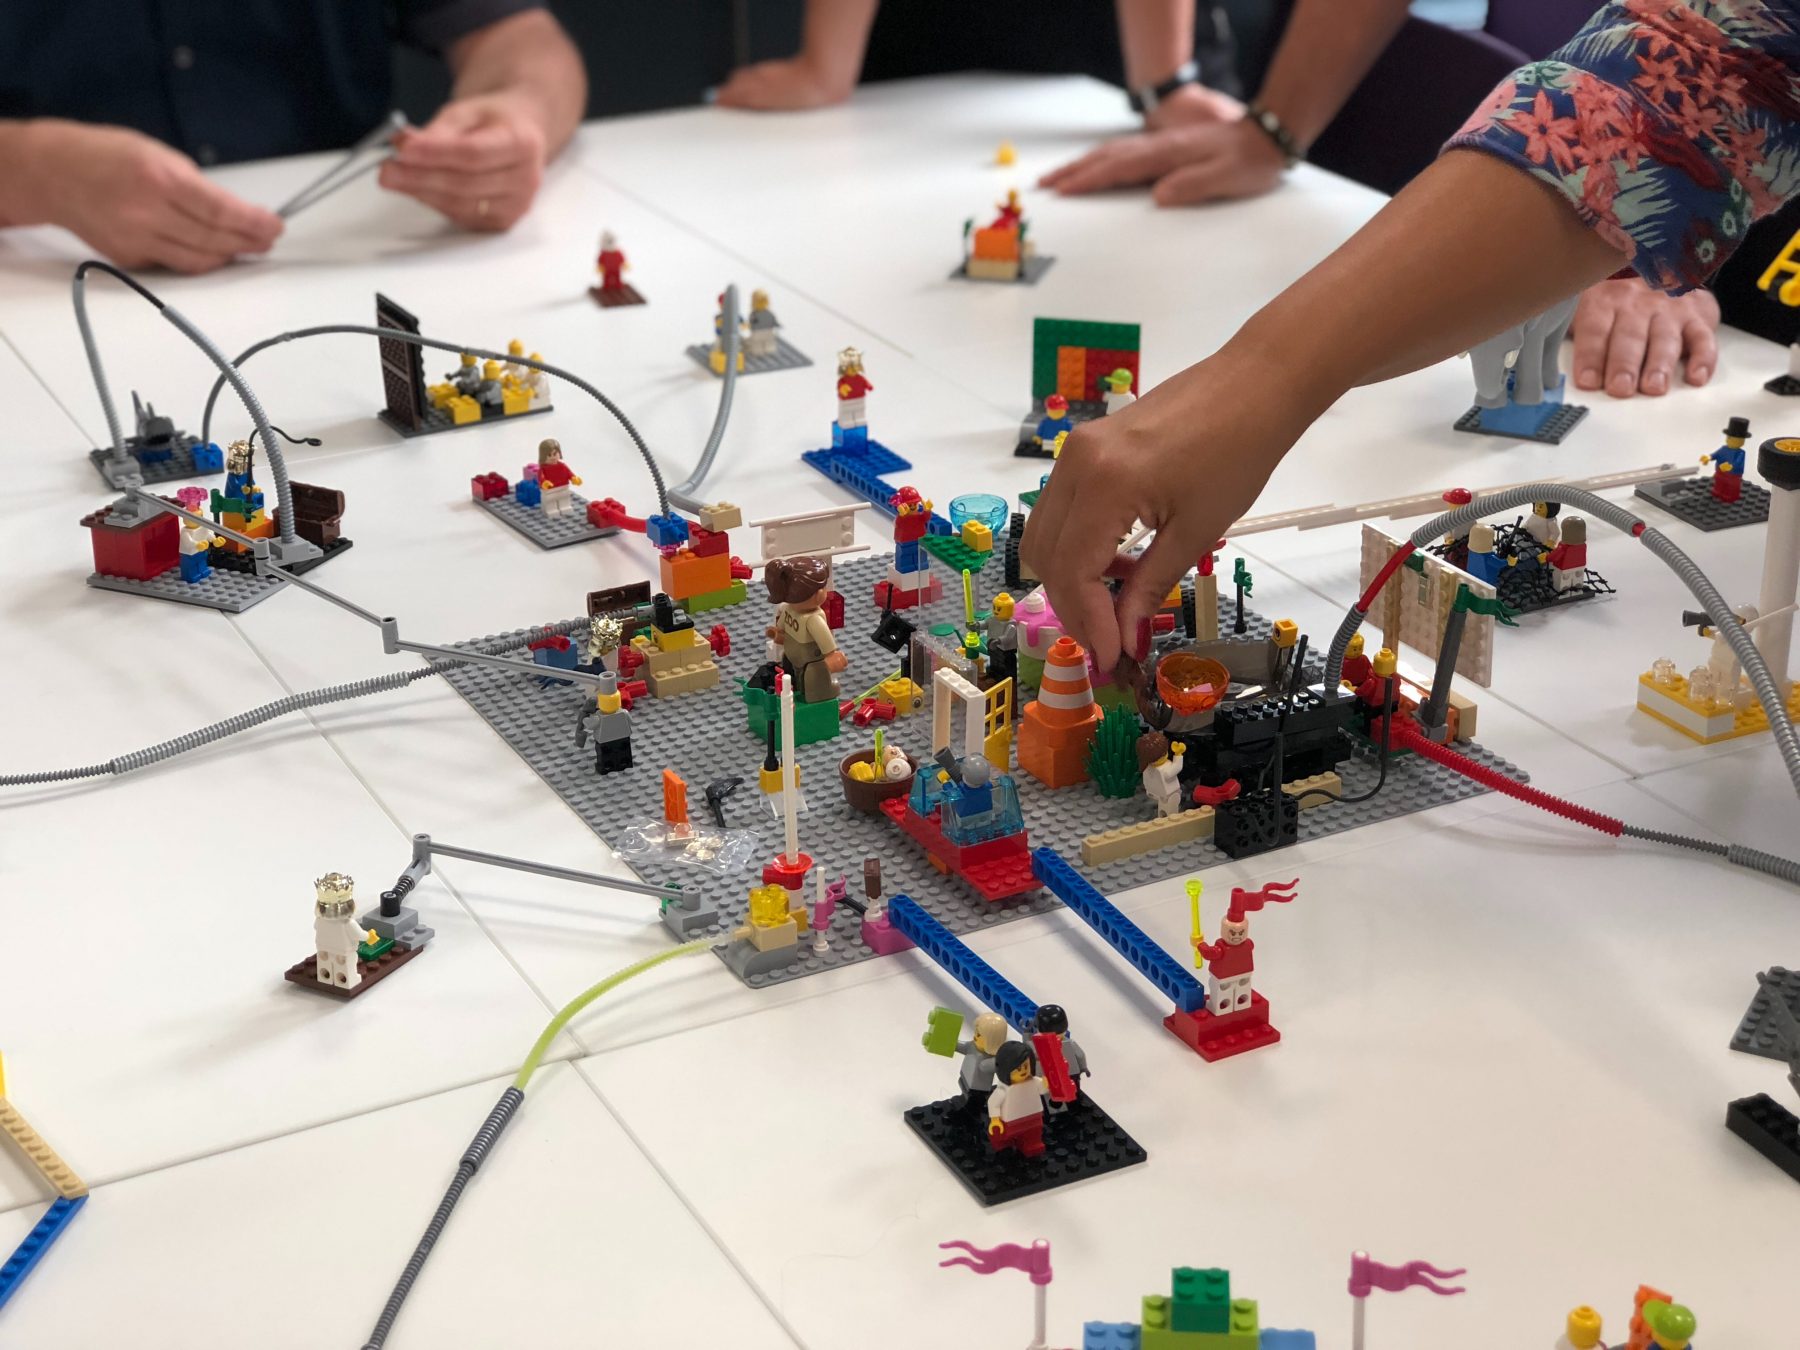 $10 million sees Scratch Foundation work with The LEGO Foundation tech play